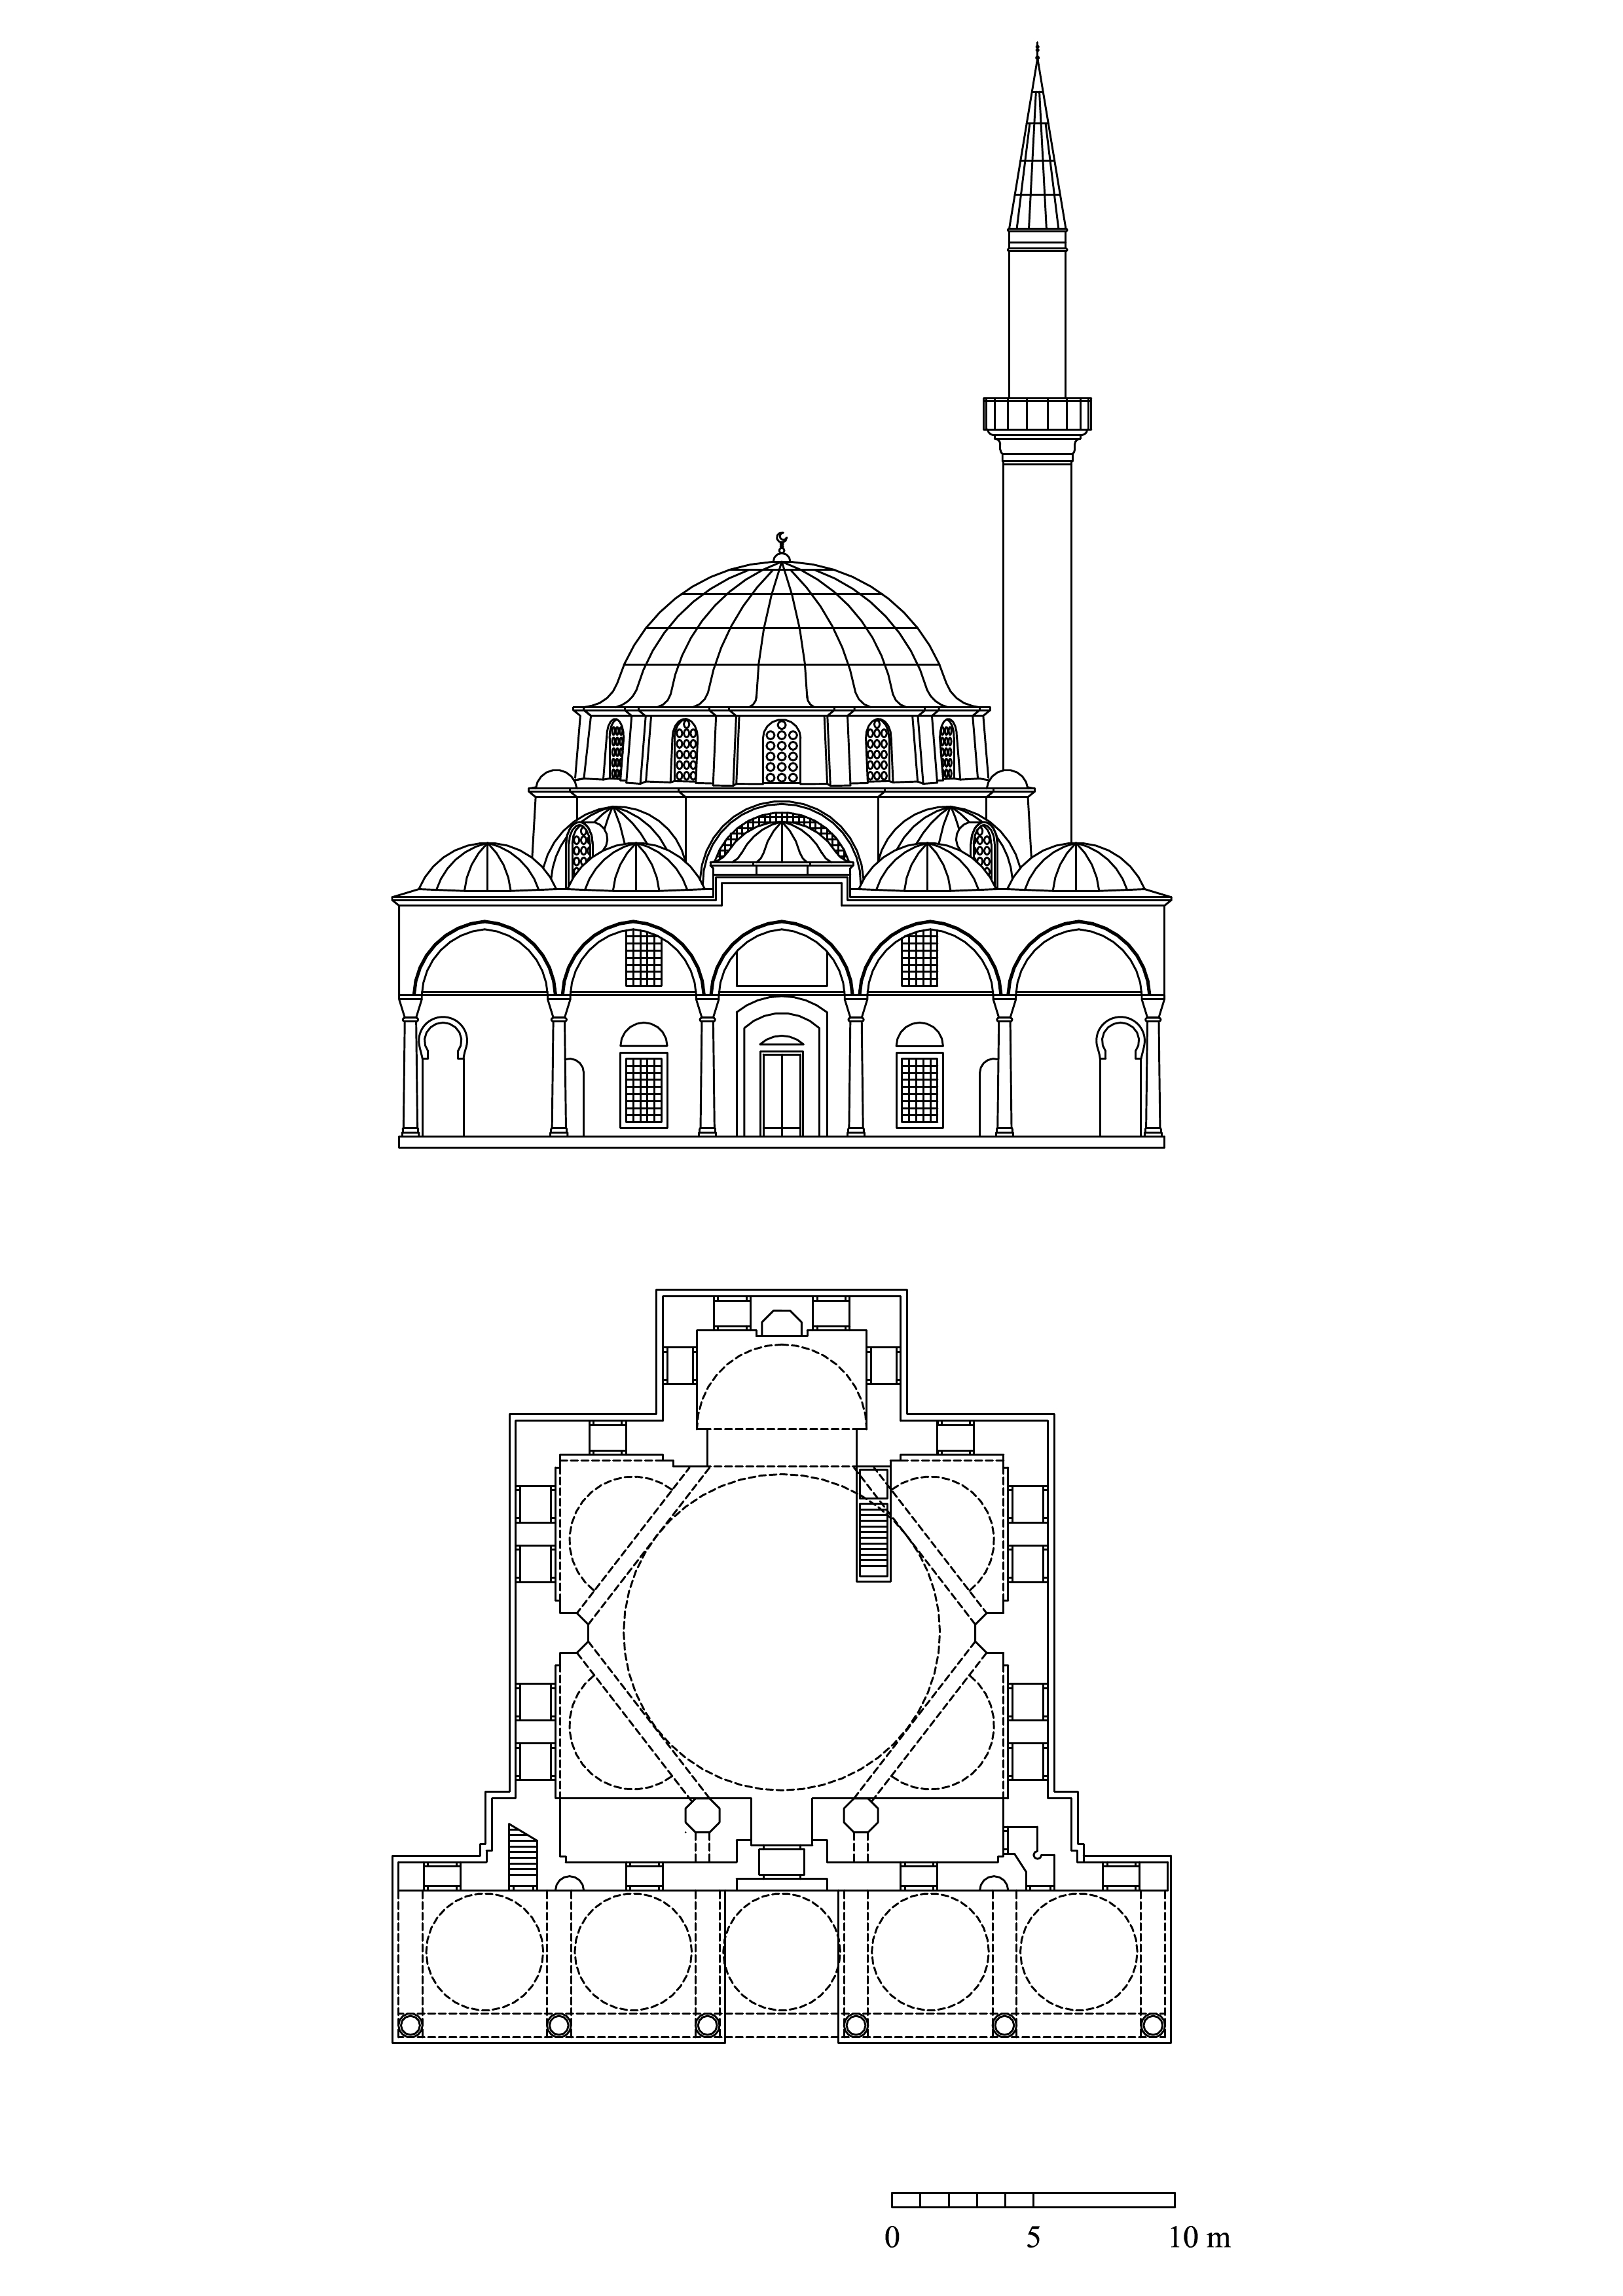 Molla Çelebi Mosque - Floor plan and elevation. DWG file in AutoCAD 2000 format. Click the download button to download a zipped file containing the .dwg file.